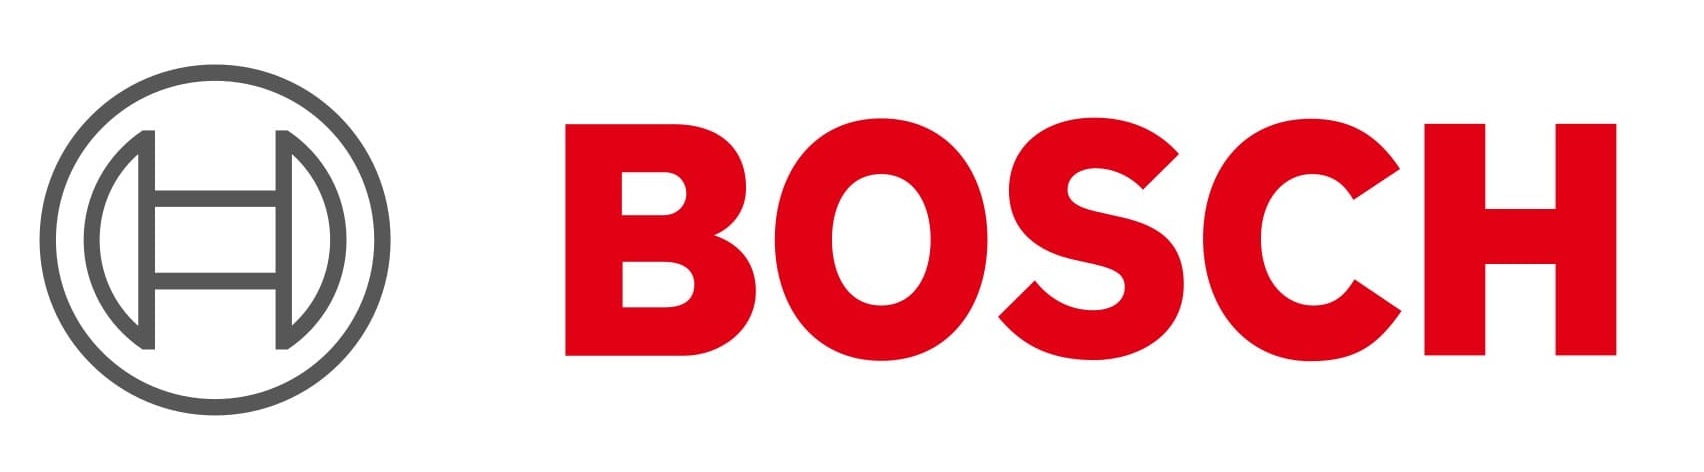 BOSCH Stoves Oven Repairs, Whirlpool Stoves Oven Repairs